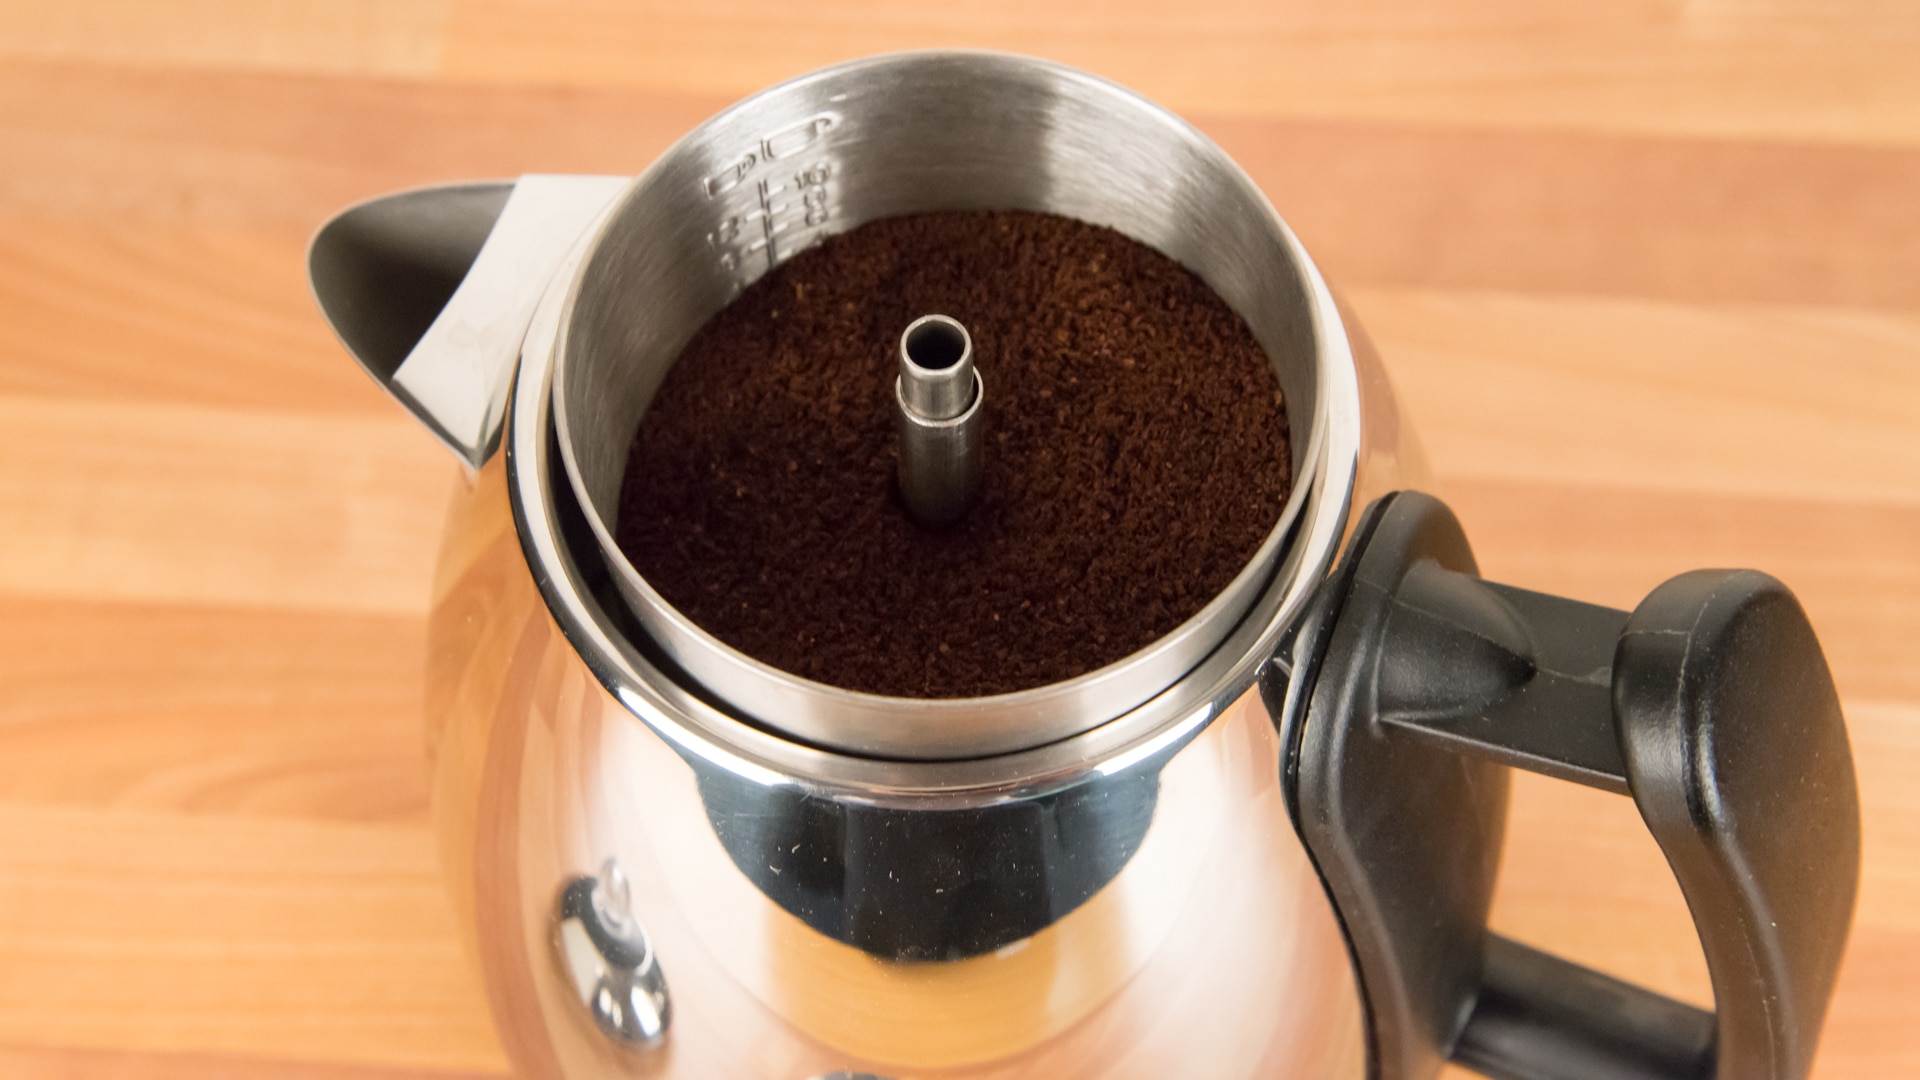 How to Measure Coffee With or Without Scales